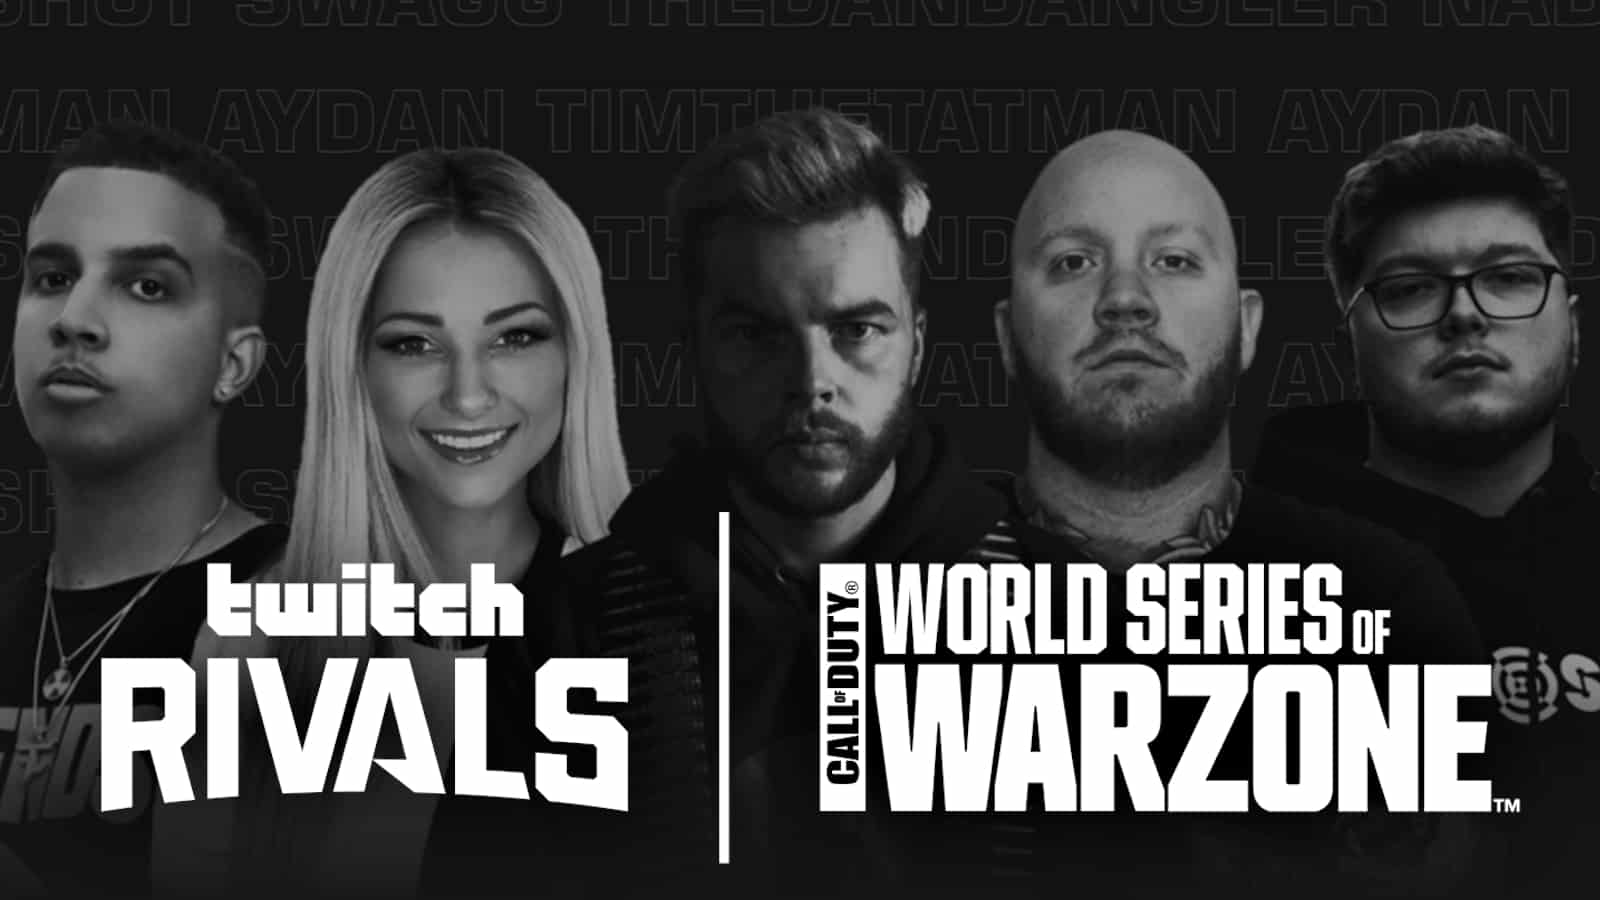 world series of warzone how to watch stream schedule teams